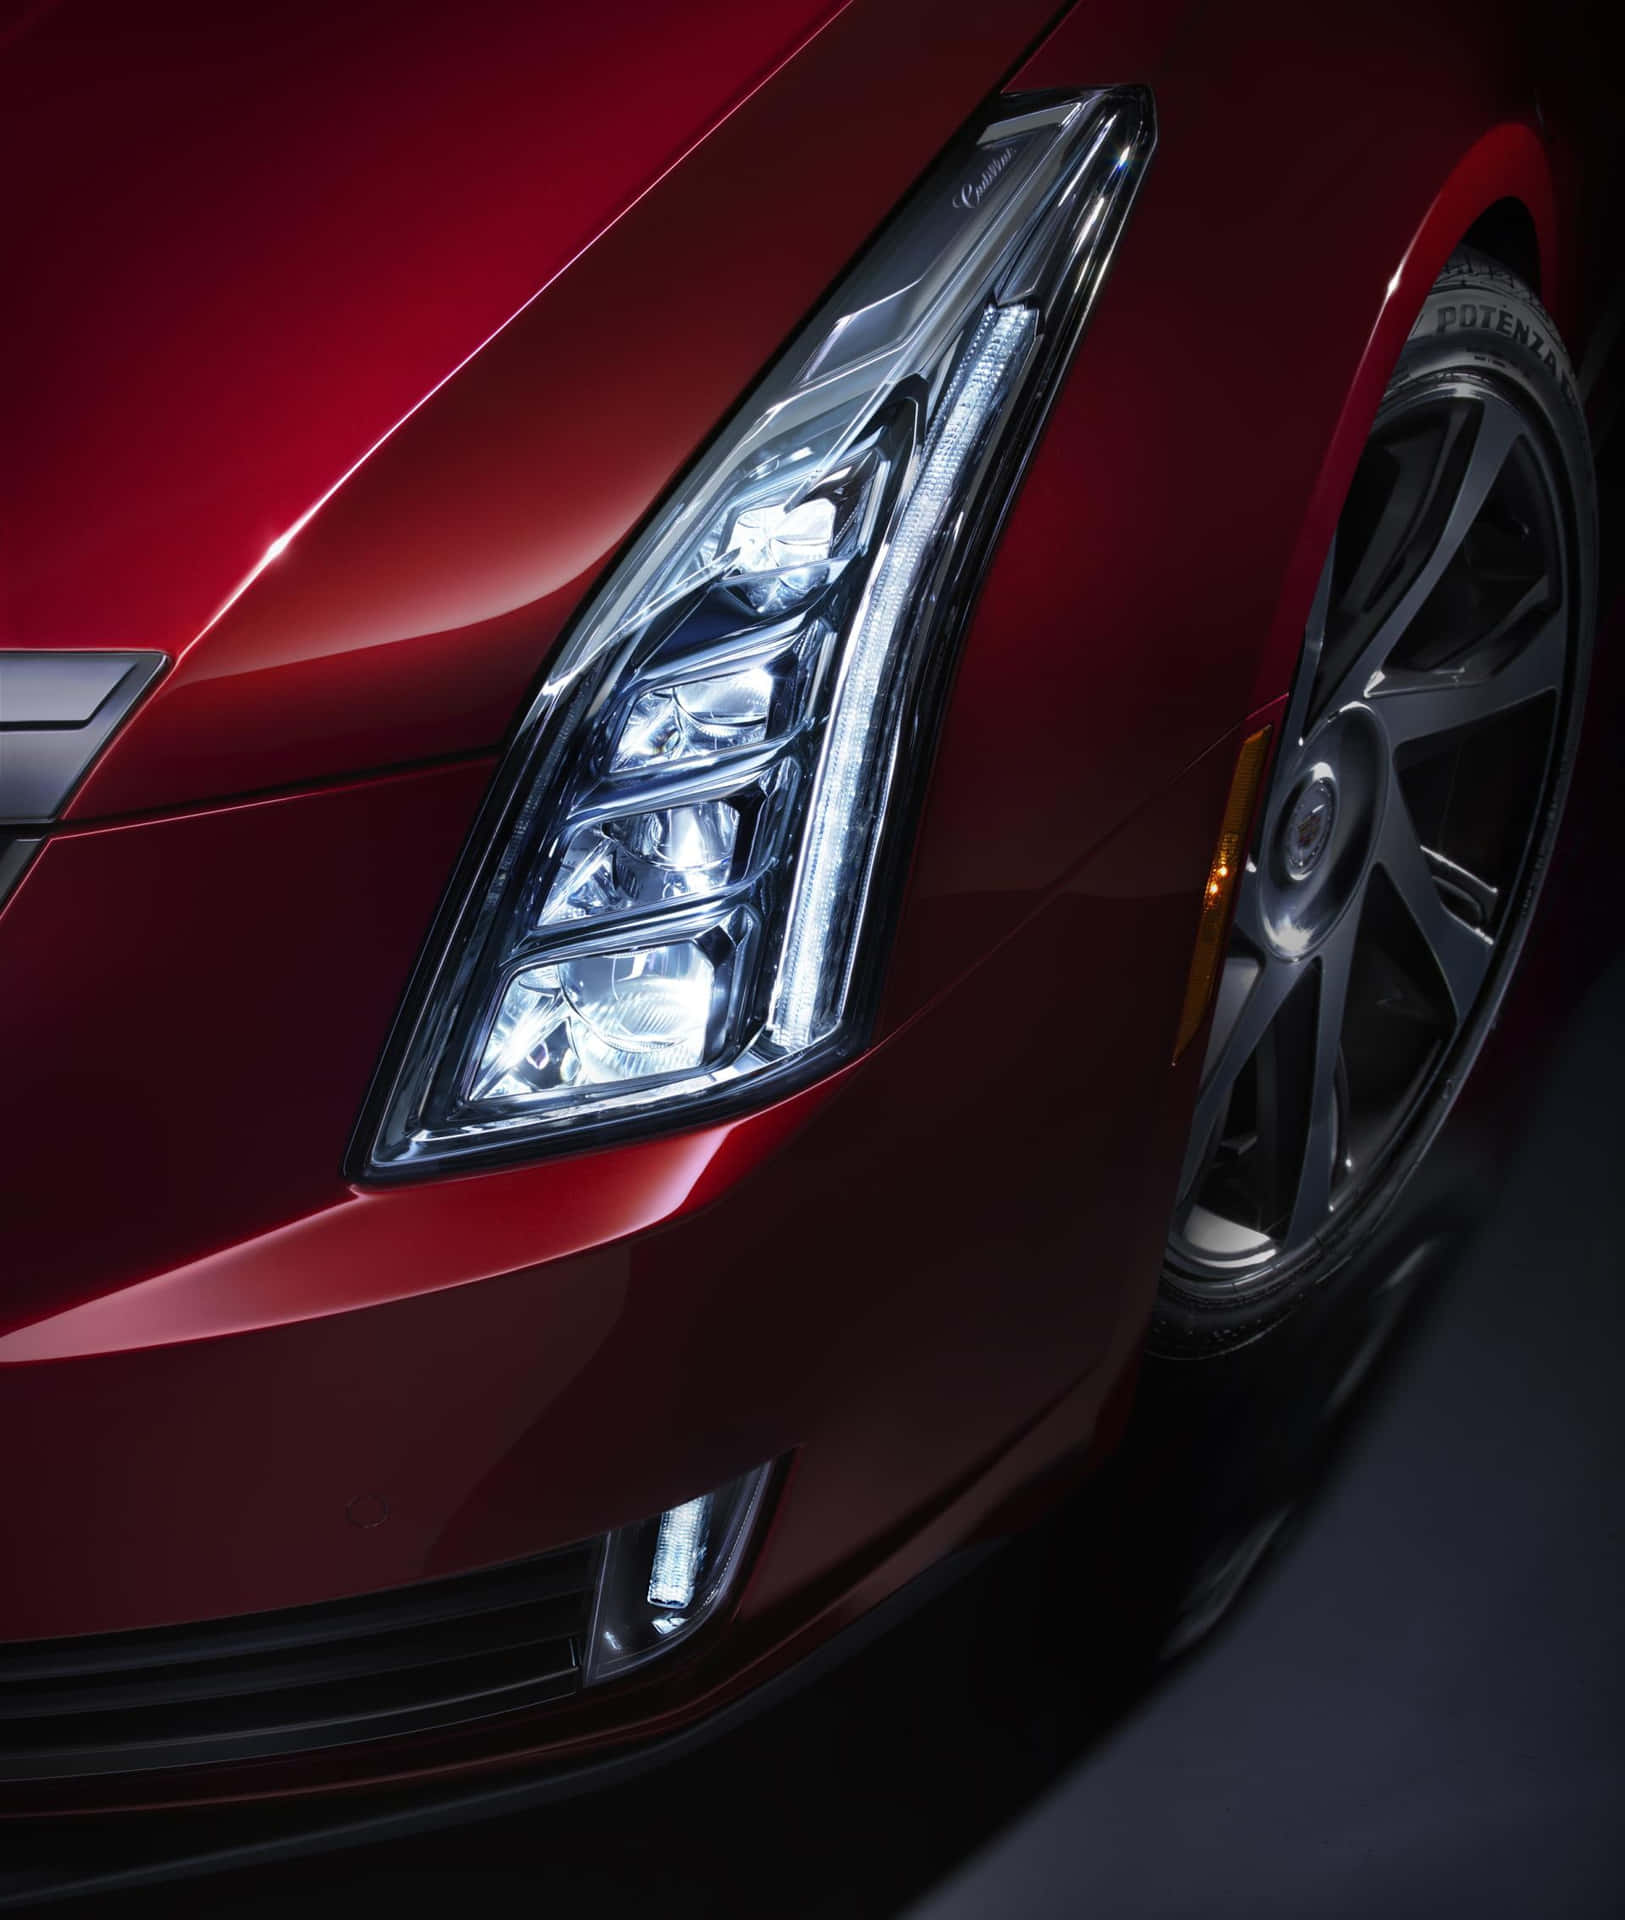 Sleek Cadillac ELR Hybrid Coupe in High Definition Wallpaper